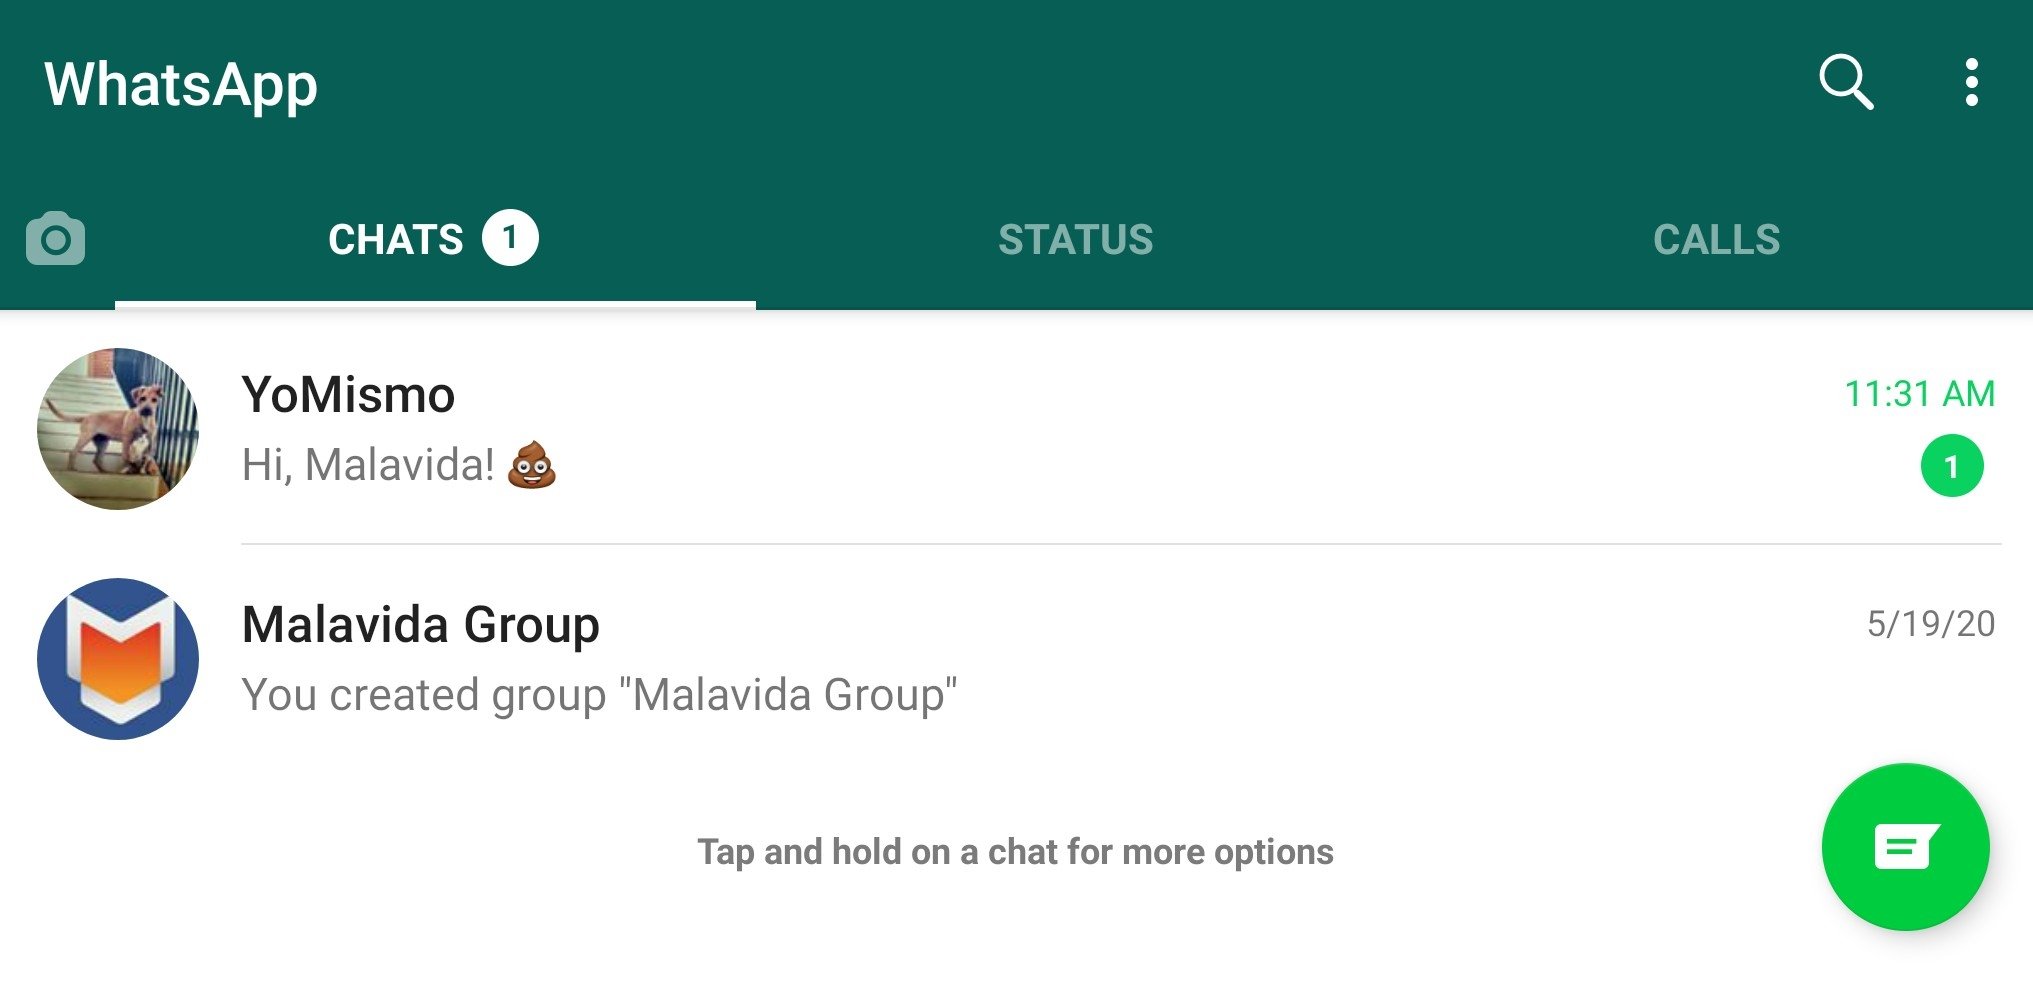 Legacy Whatsapp Apk - find the location of the jade key in roblox apkonline